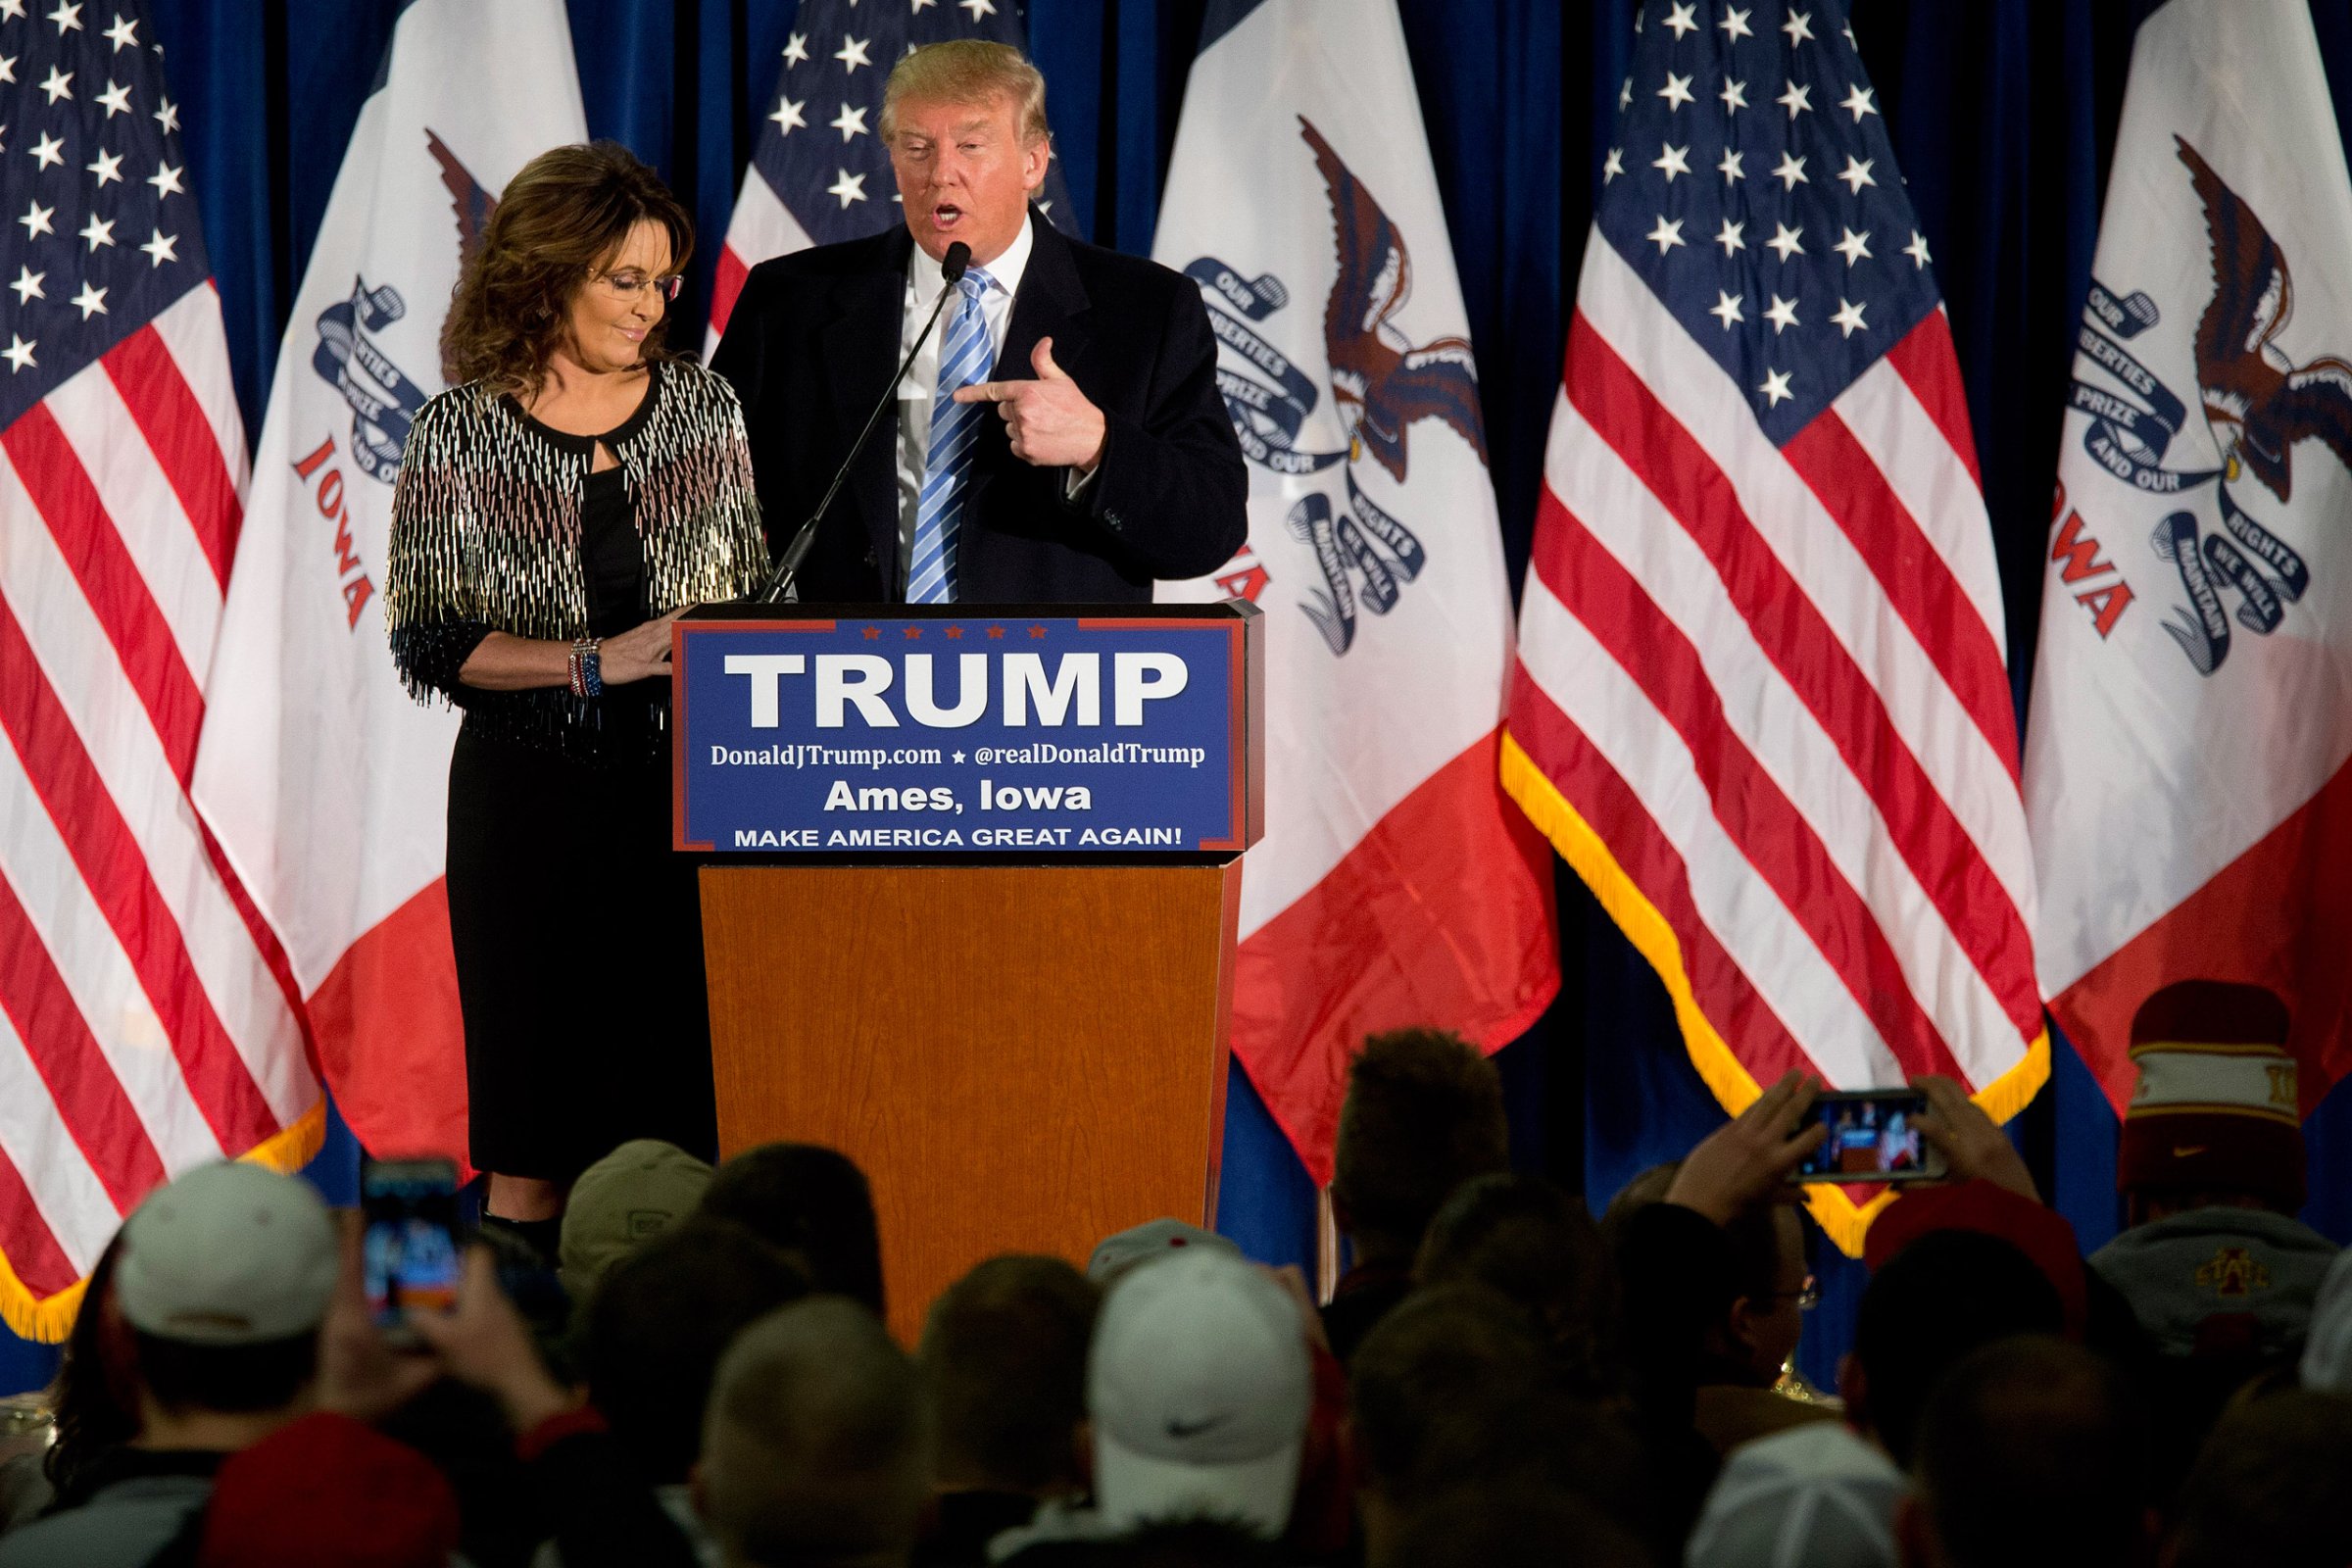 Former Alaska Gov. Sarah Palin, left, endorses Republican presidential candidate Donald Trump during a rally at the Iowa State University, Tuesday, Jan. 19, 2016, in Ames, Iowa. (AP Photo/Mary Altaffer)